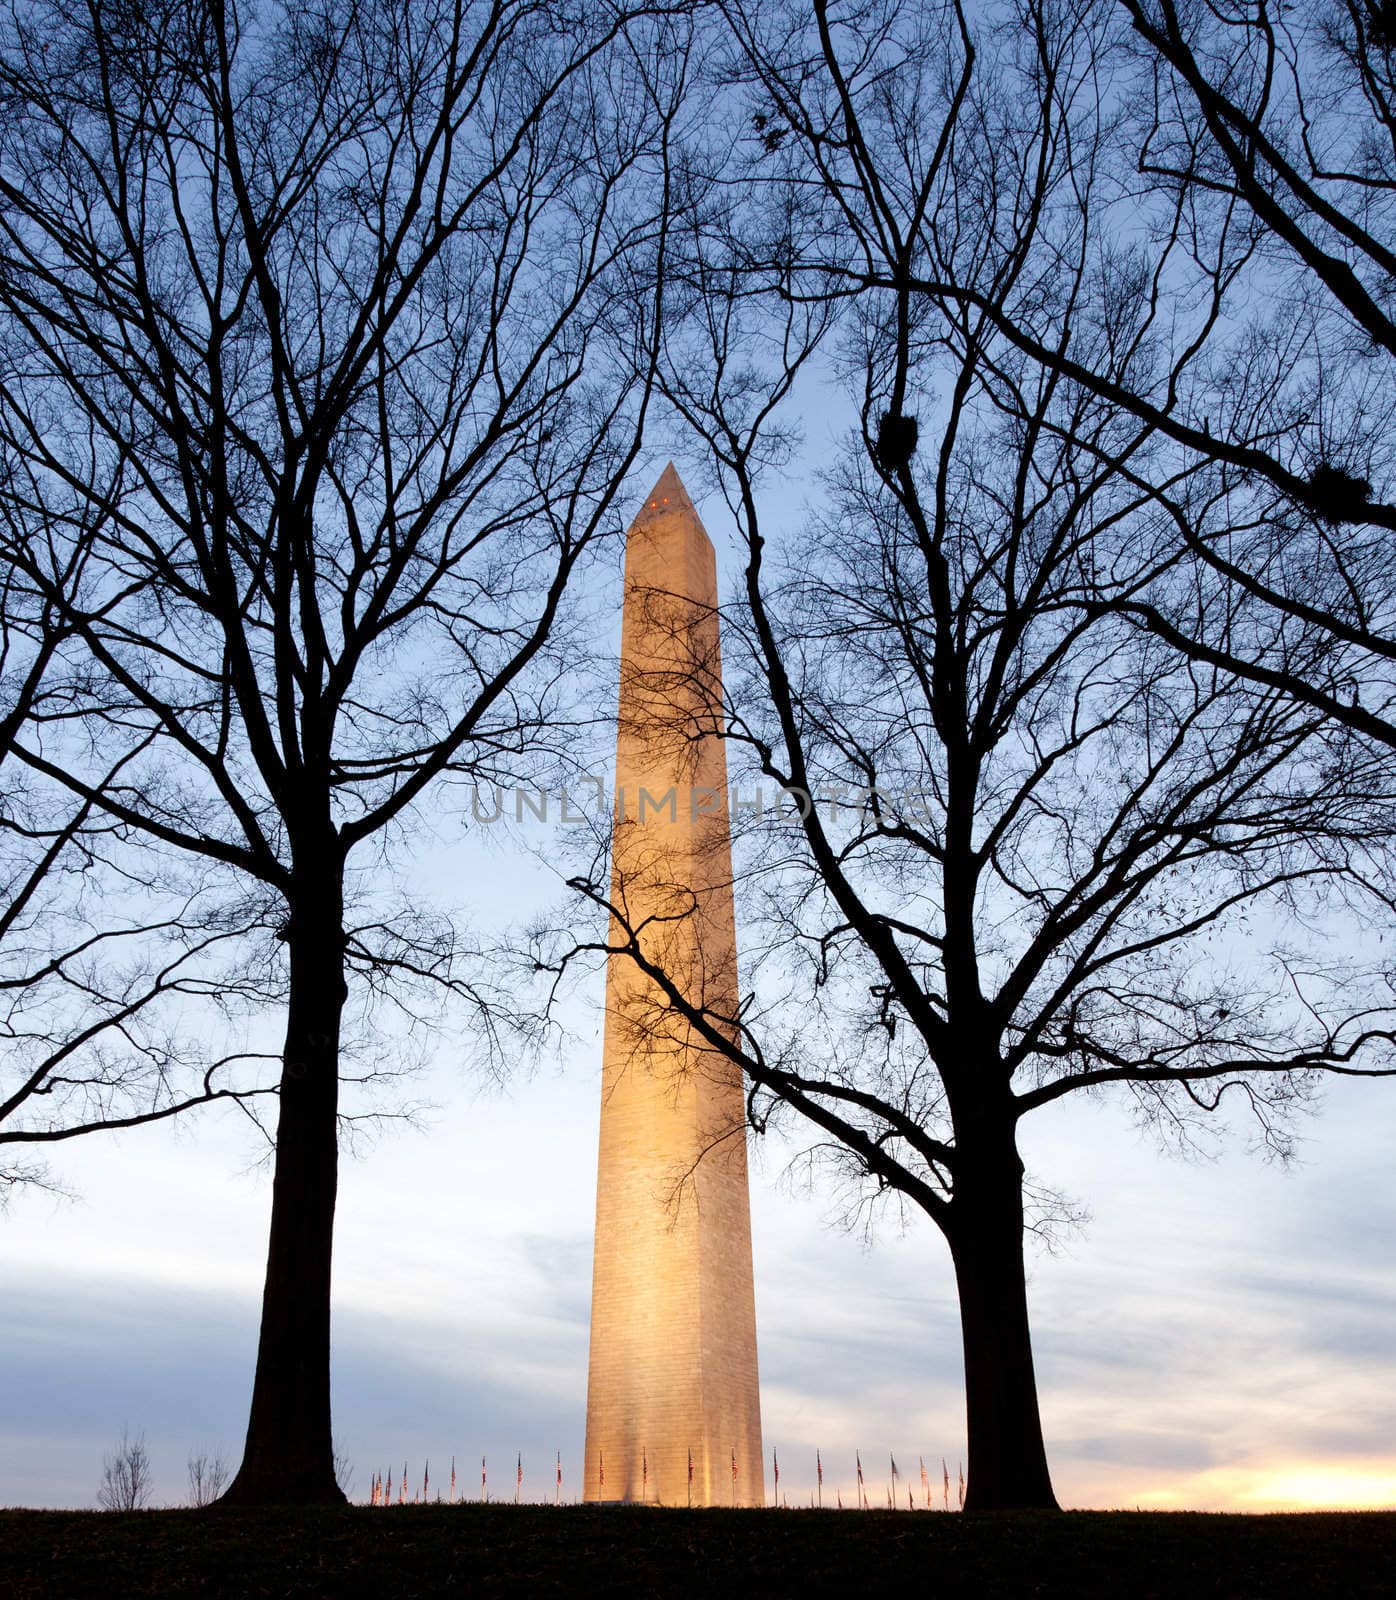 Washington Monument in DC at dusk as the sun is setting and tower is illuminated and silhouetted behind trees